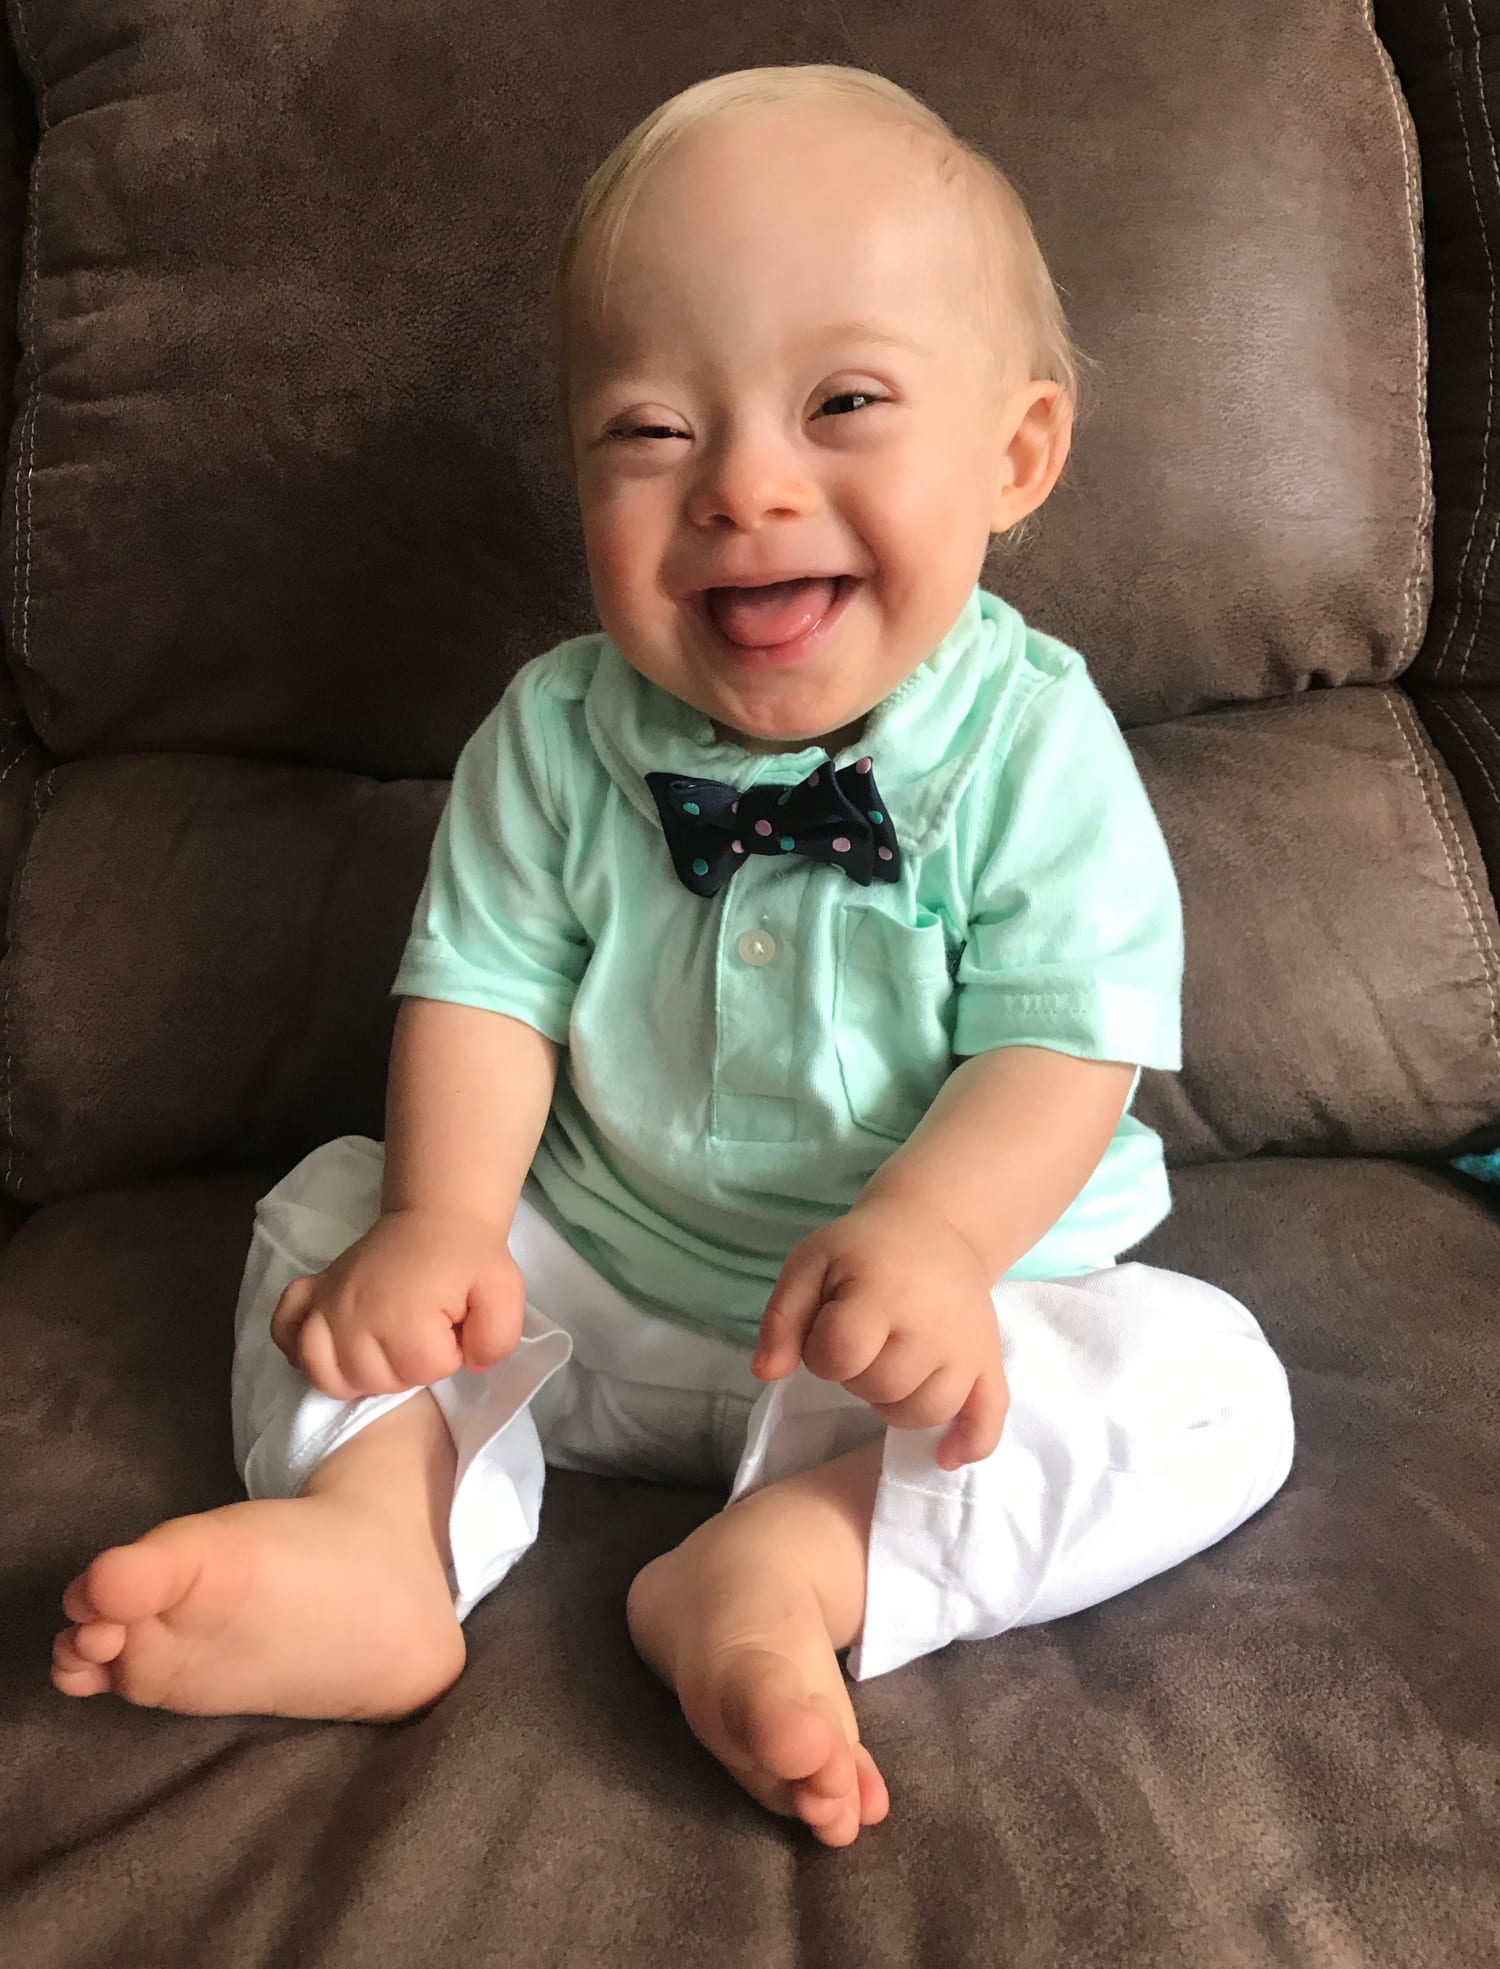 first Gerber baby with Down syndrome